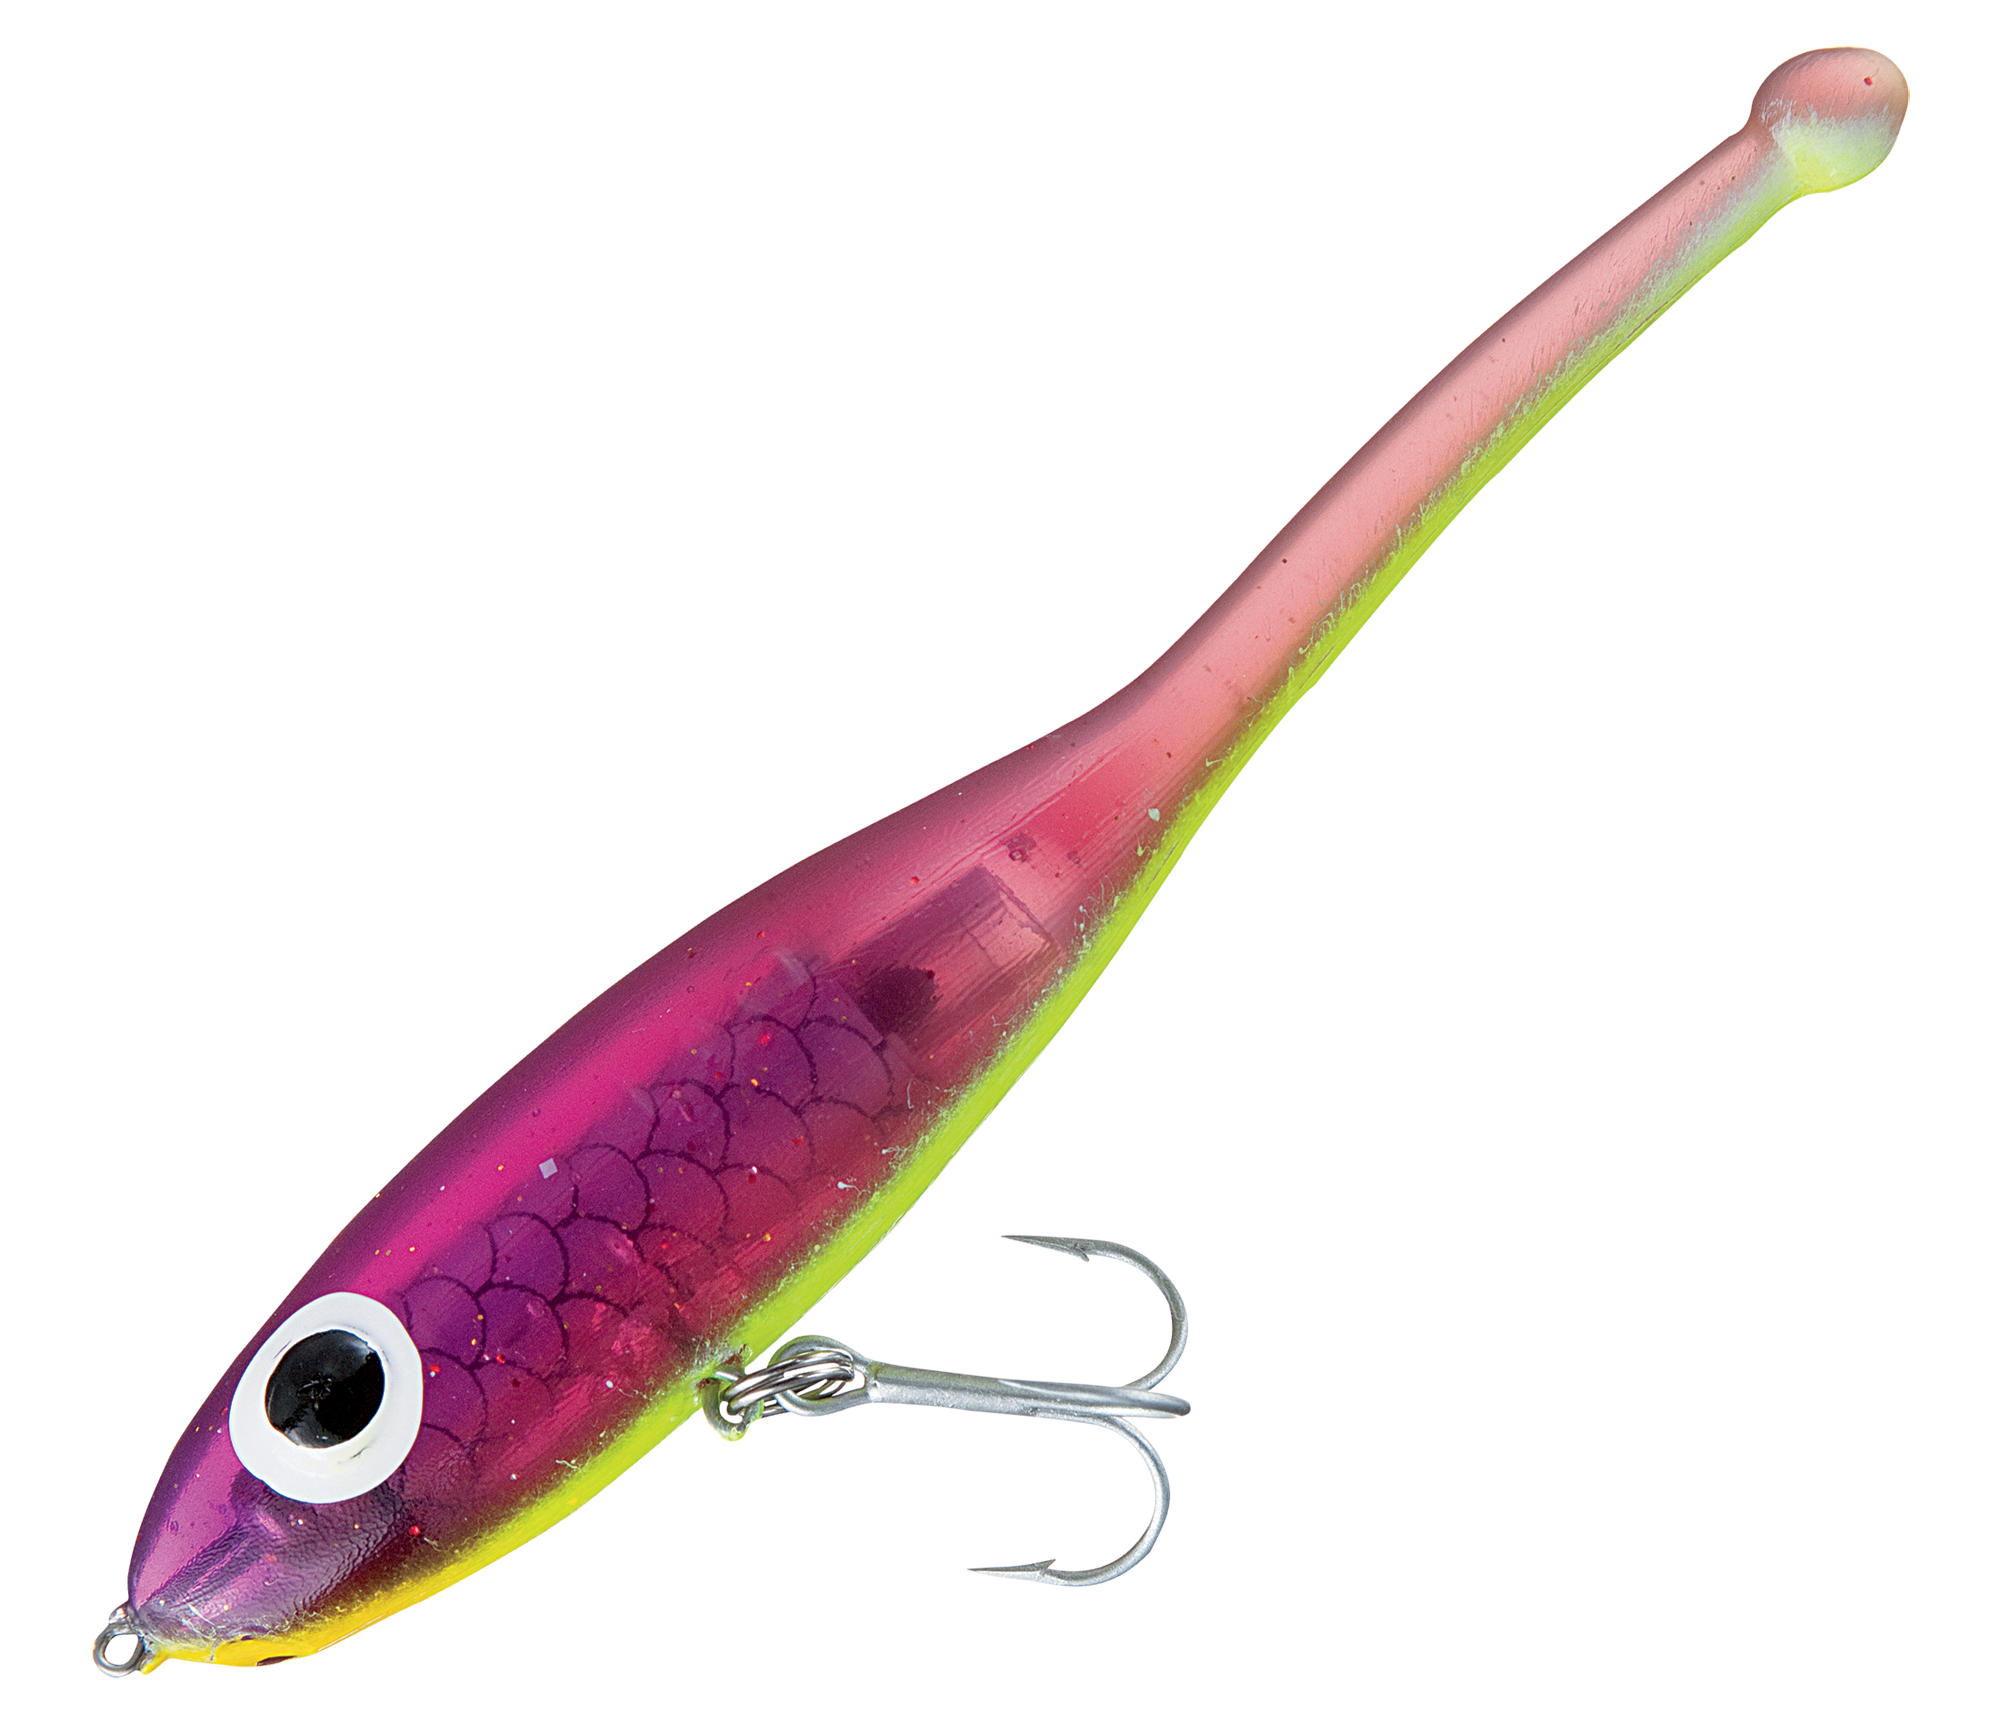 The Slick Lures Mad Mullet 82